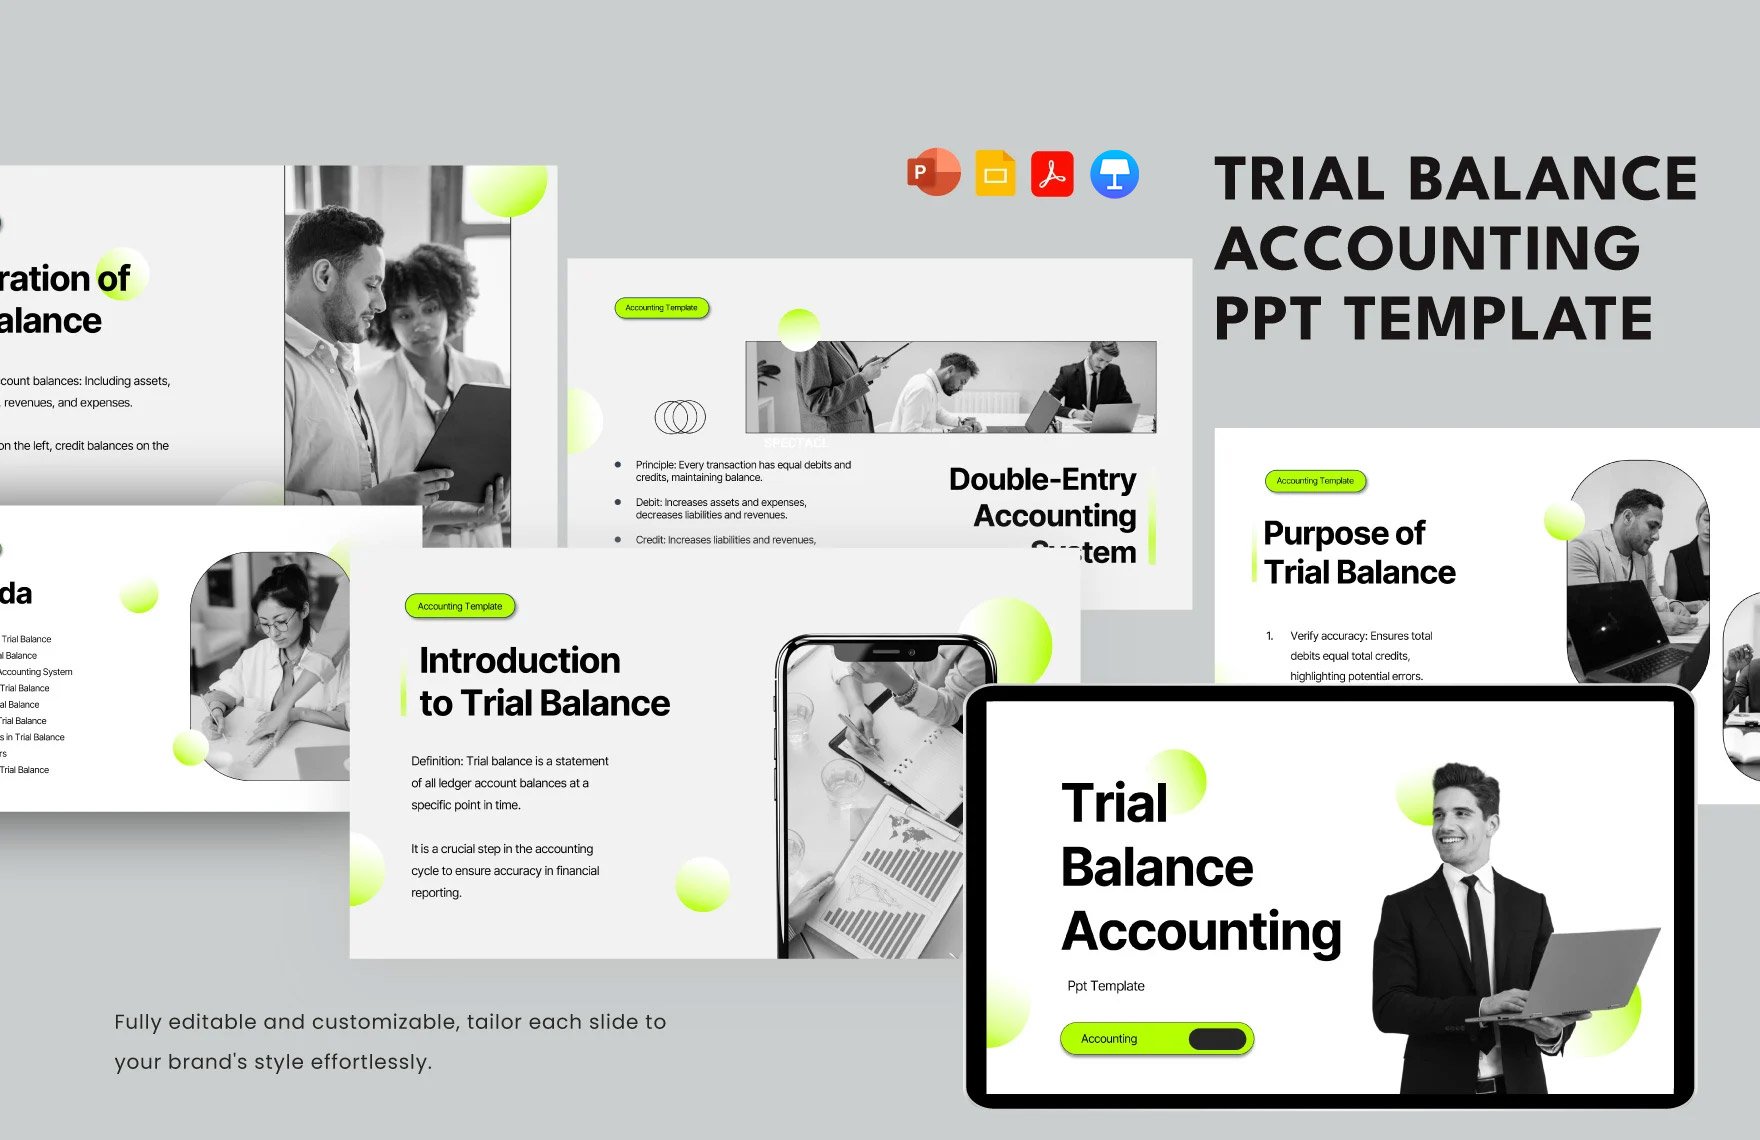 Free Trial Balance Accounting PPT Template in PDF, PowerPoint, Google Slides, Apple Keynote